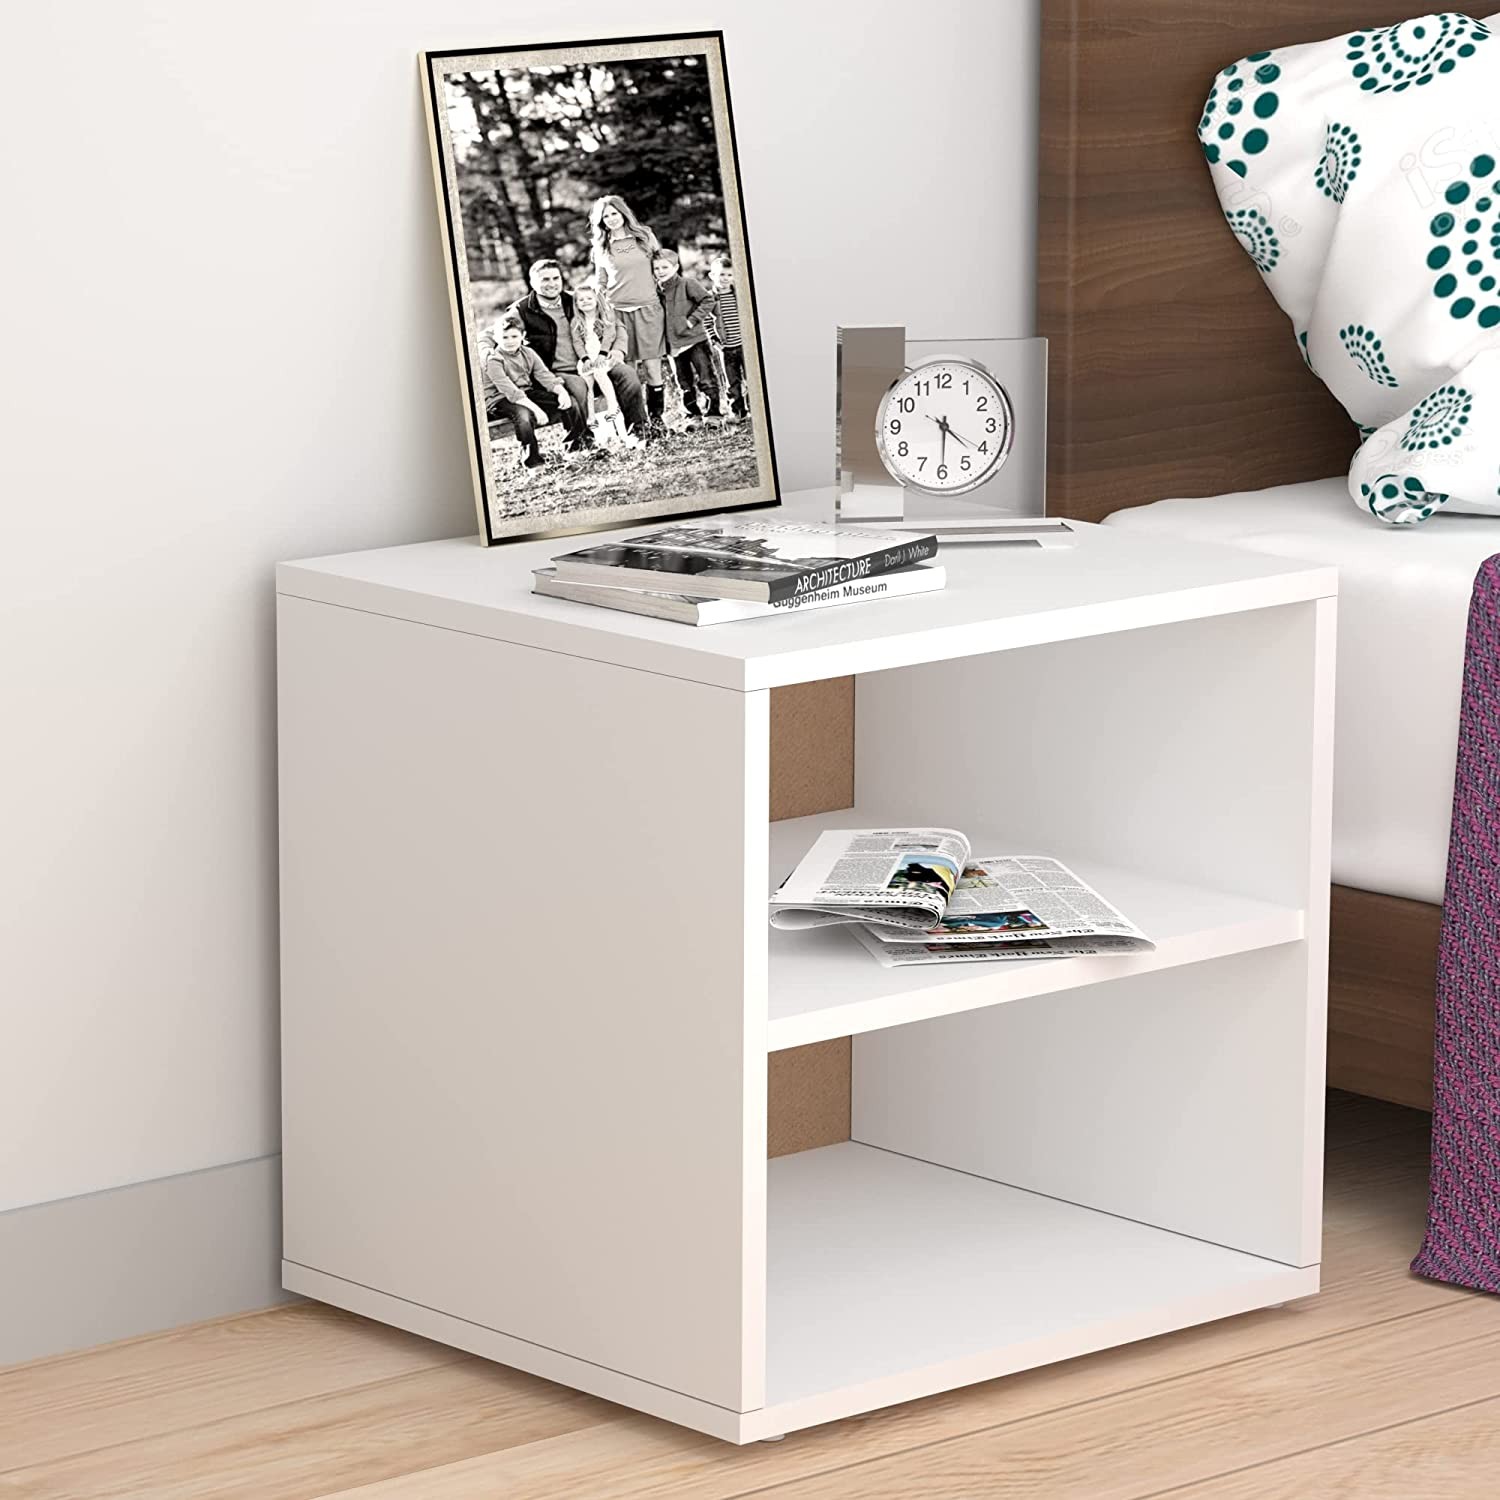 addy-engineered-wood-bed-side-table-end-table-white-rd-addy-wt